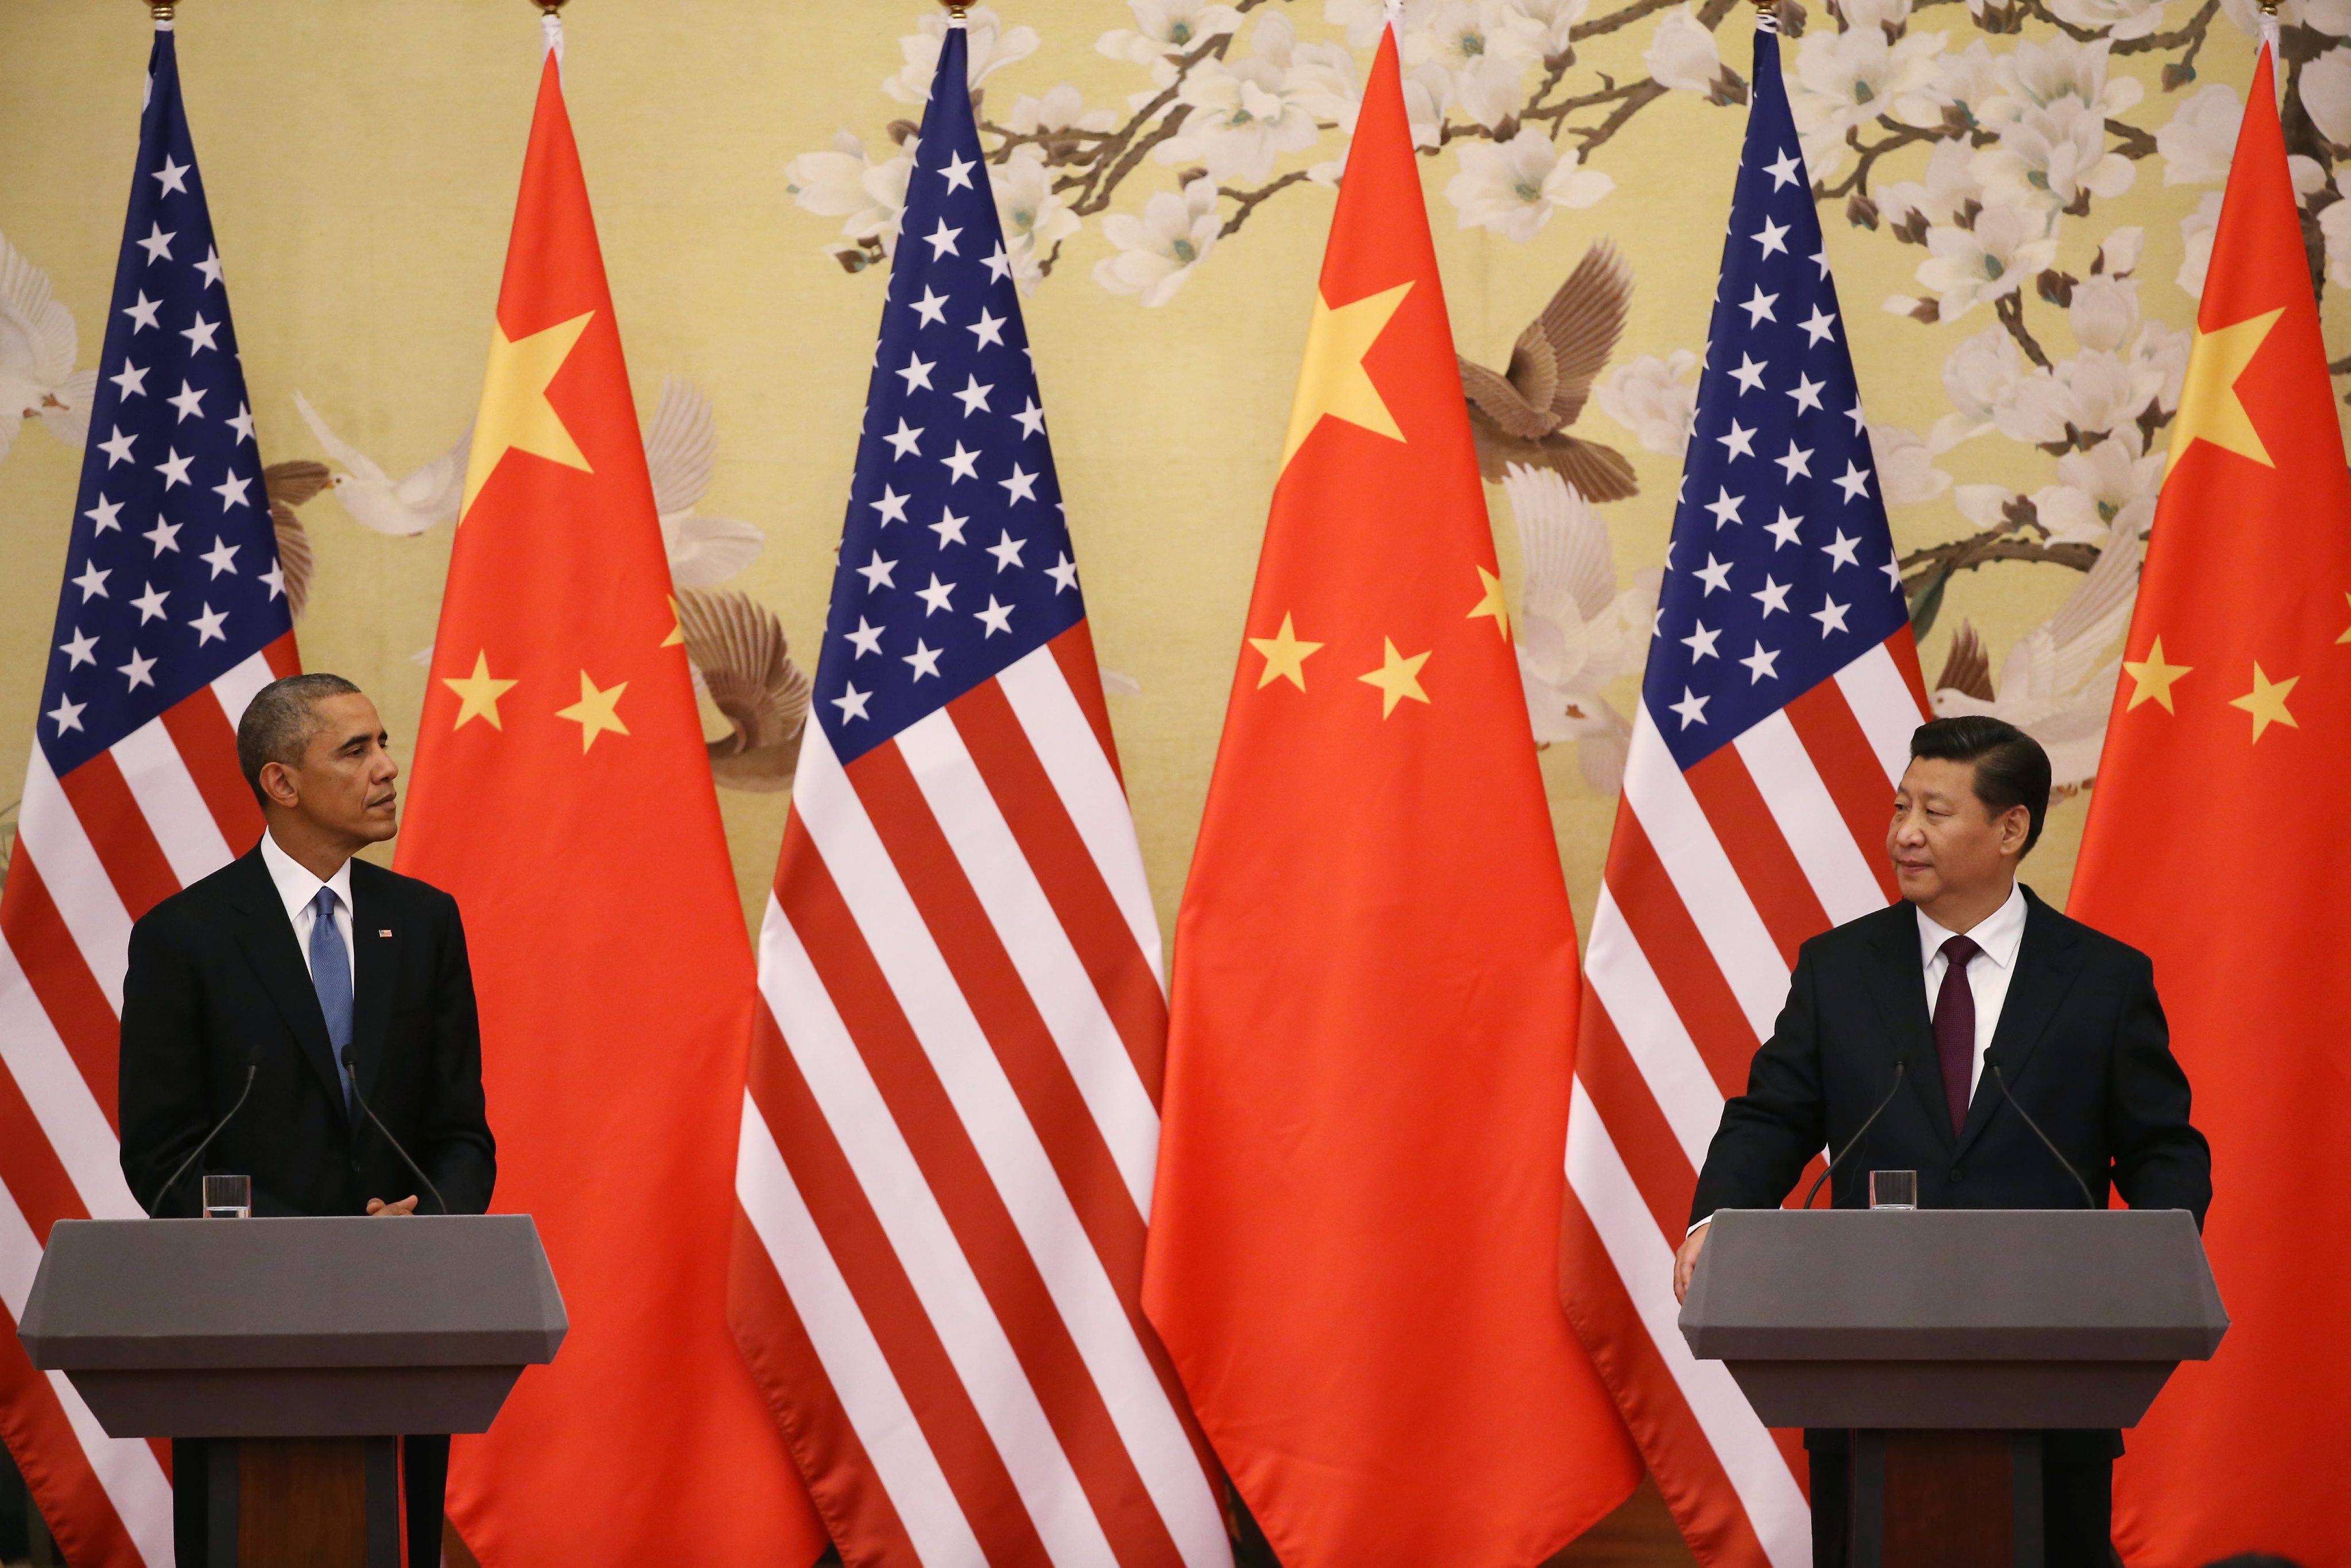 US President Barack Obama and Chinese President Xi Jinping hold a briefing at the Asia Pacific Economic Cooperation 2014 summit in Beijing. Photo: EPA